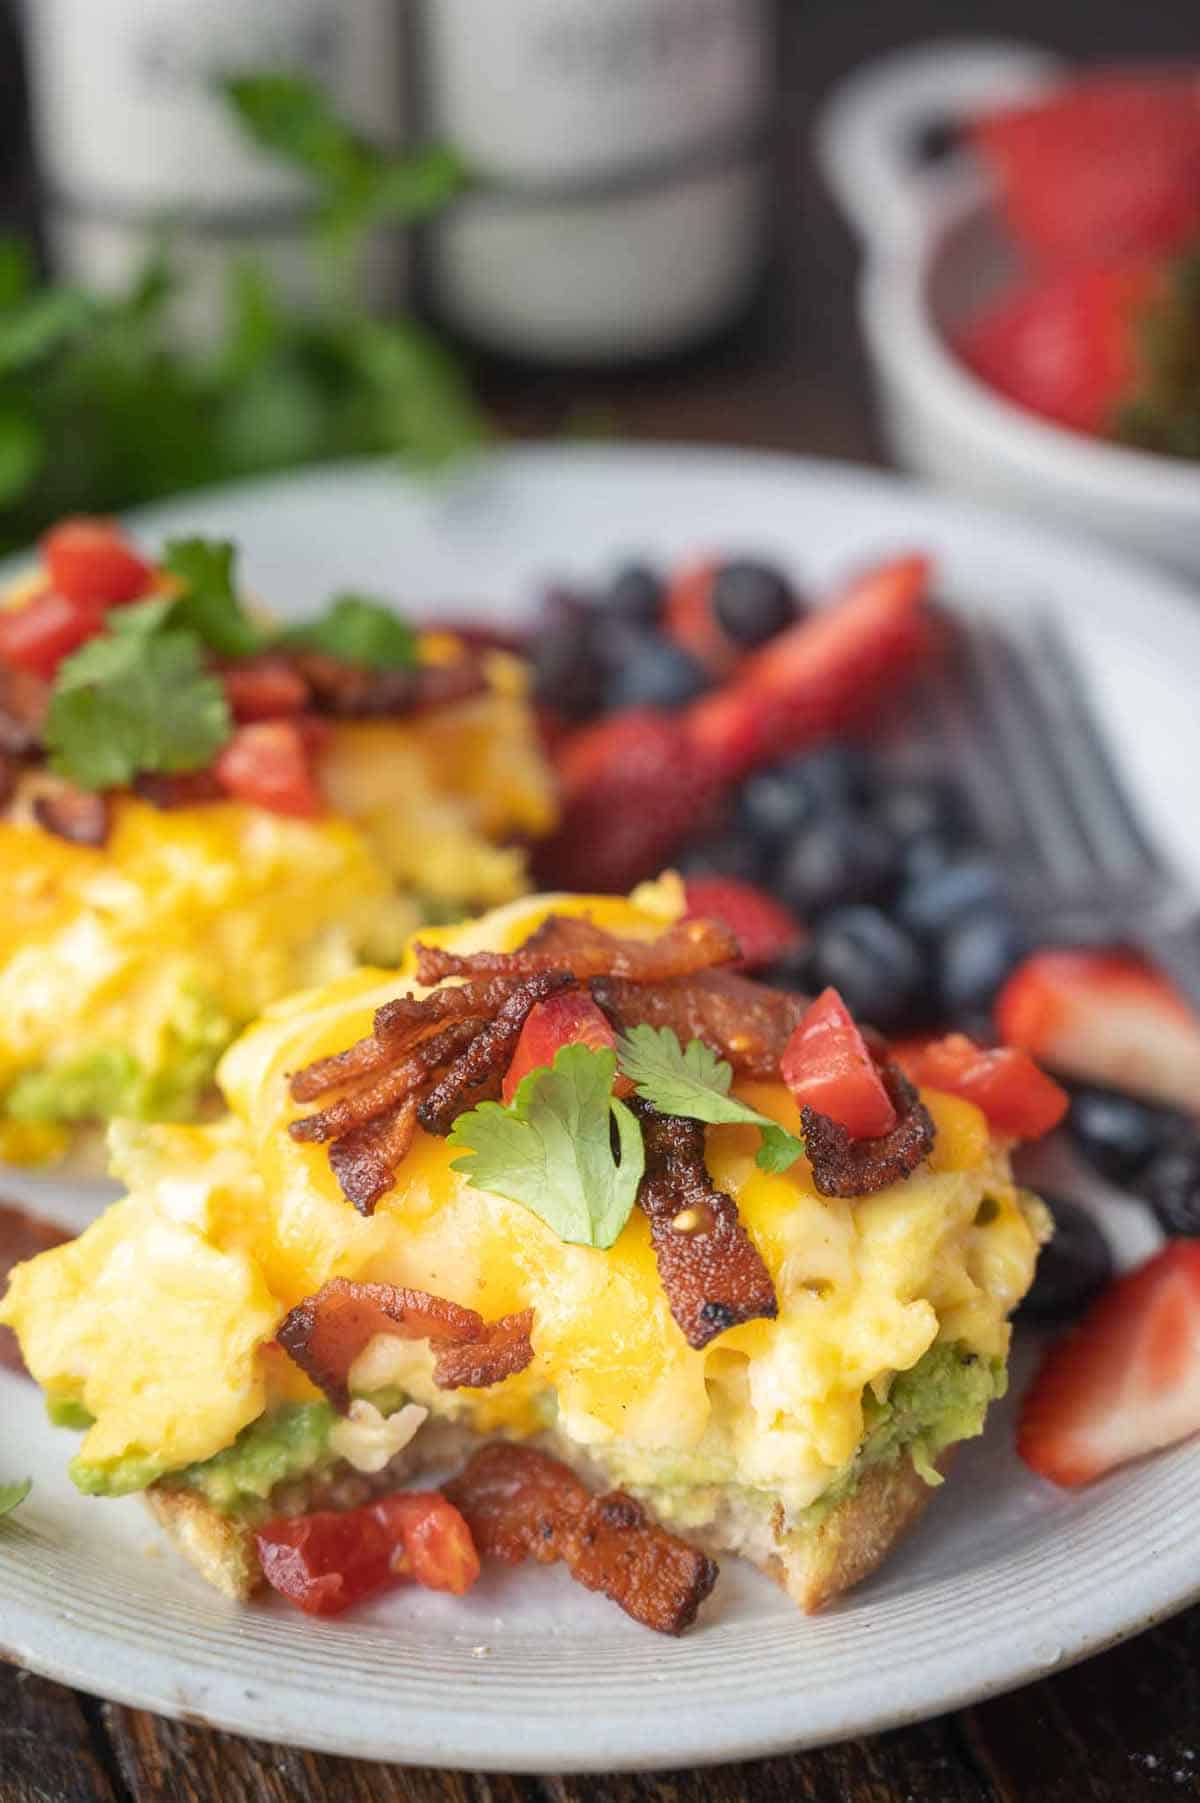 Open faced breakfast sandwich on a plate with a bite out of it.